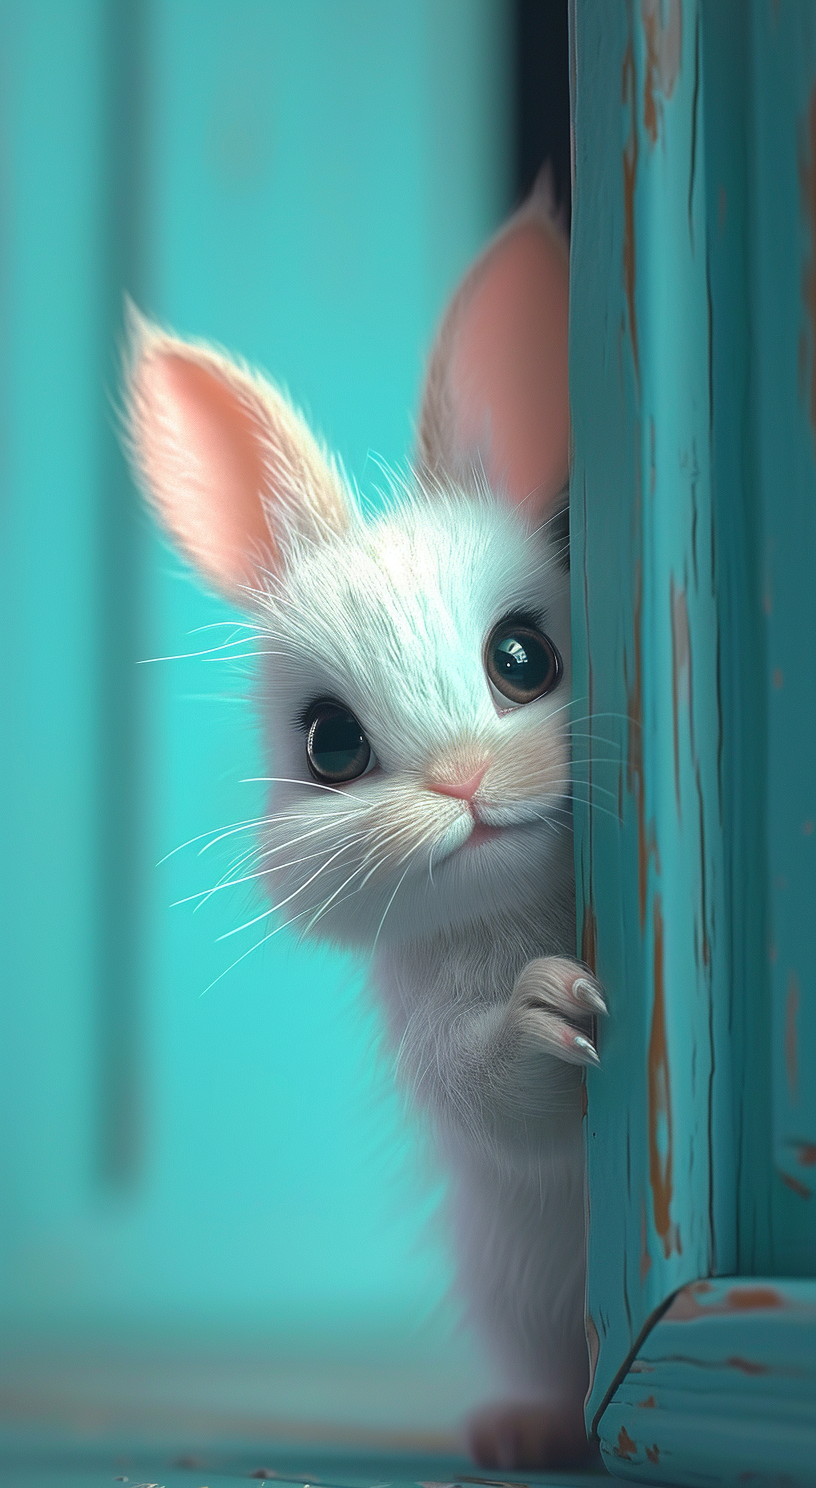 Experience the charm of our playful white bunny peeking from a vibrant turquoise door.